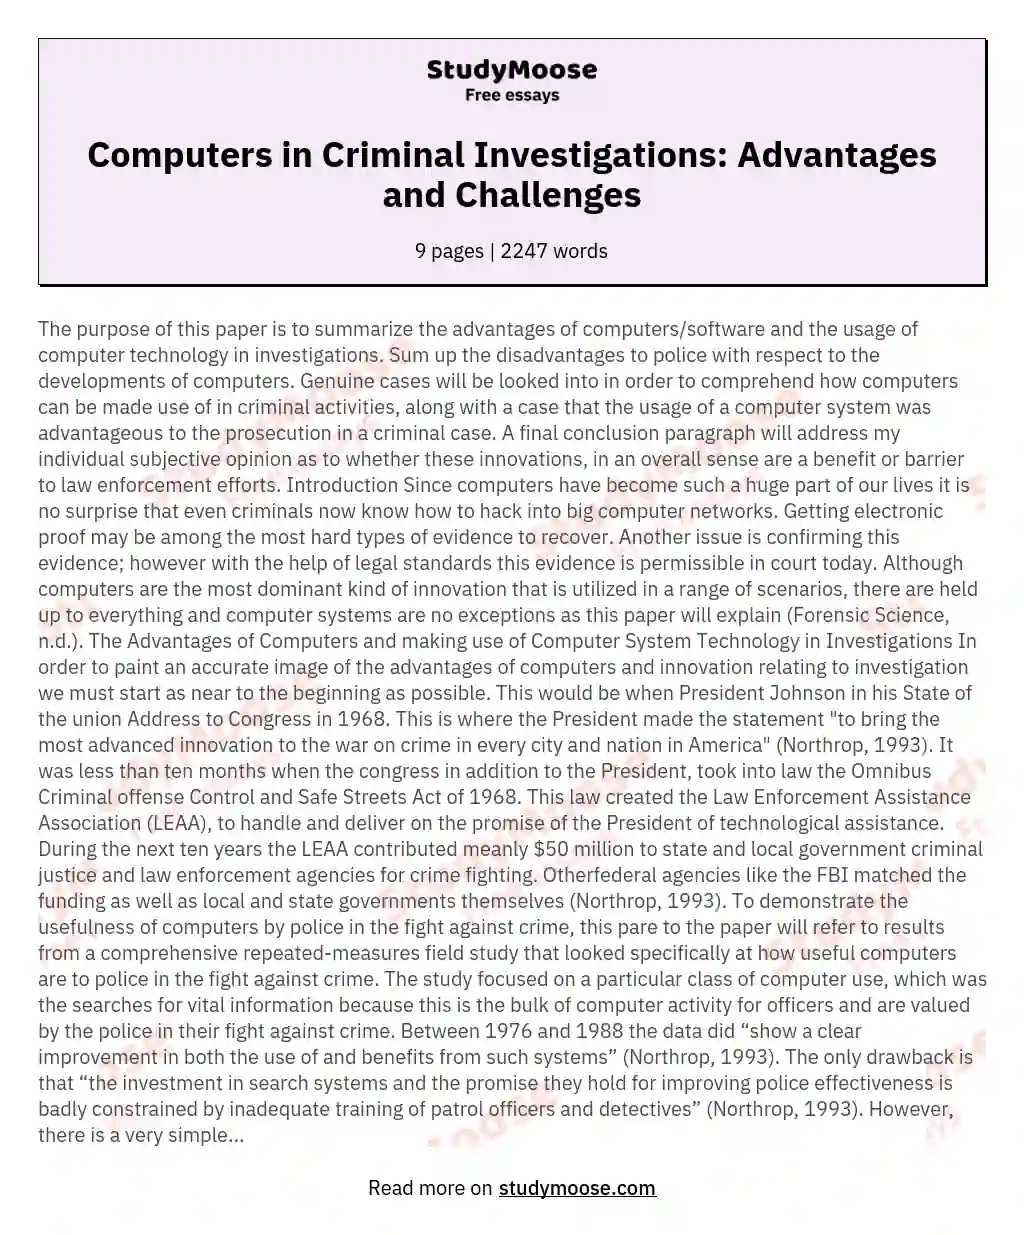 Computers in Criminal Investigations: Advantages and Challenges essay